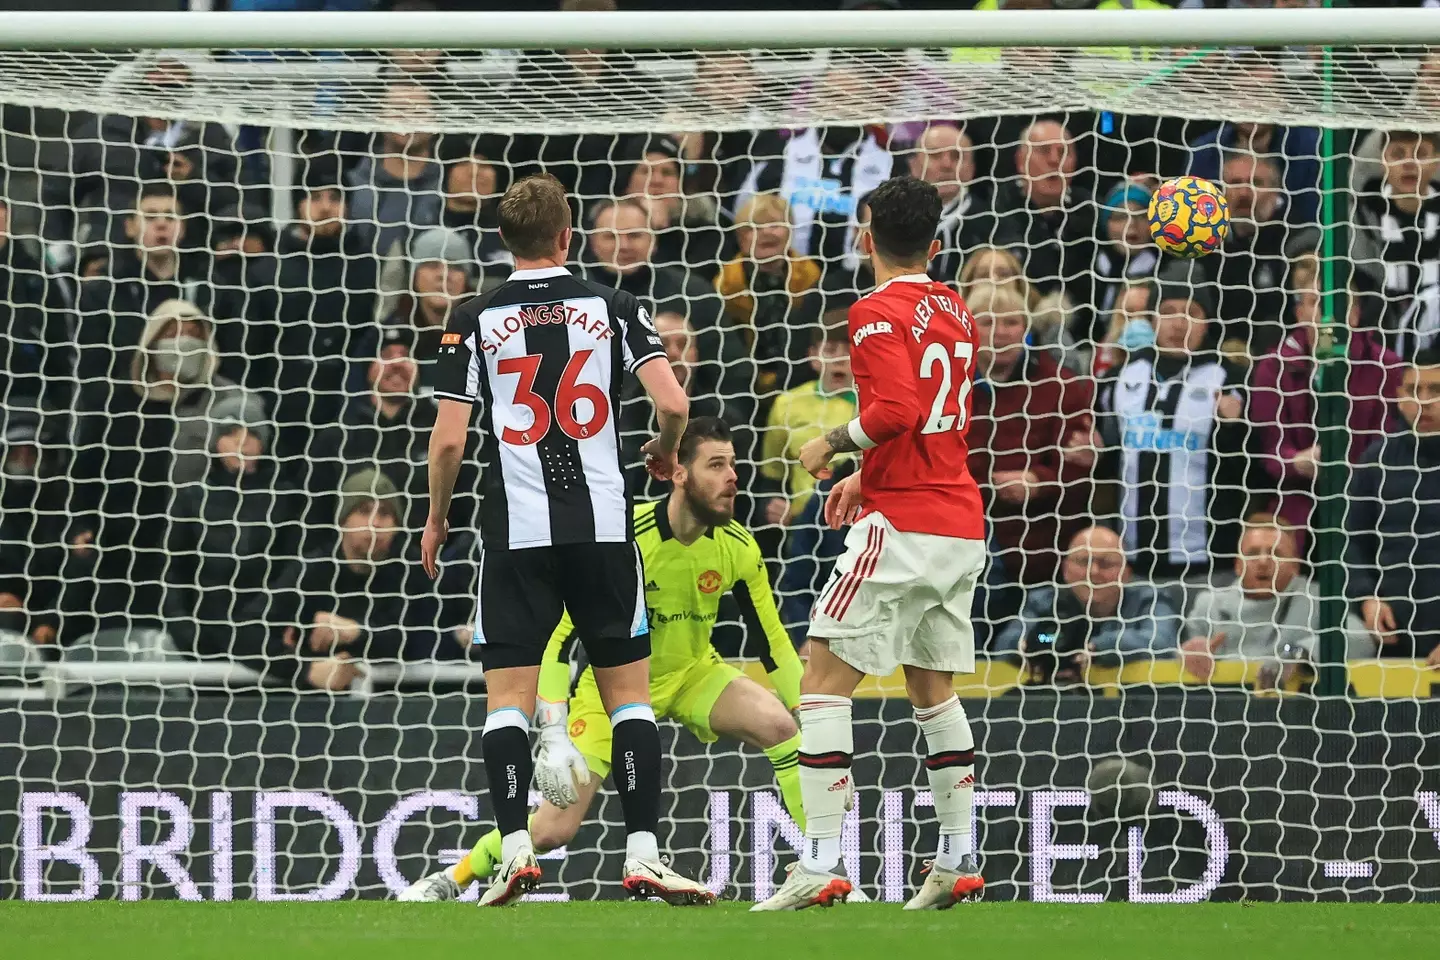 United were also poor against Newcastle. Image: PA Images